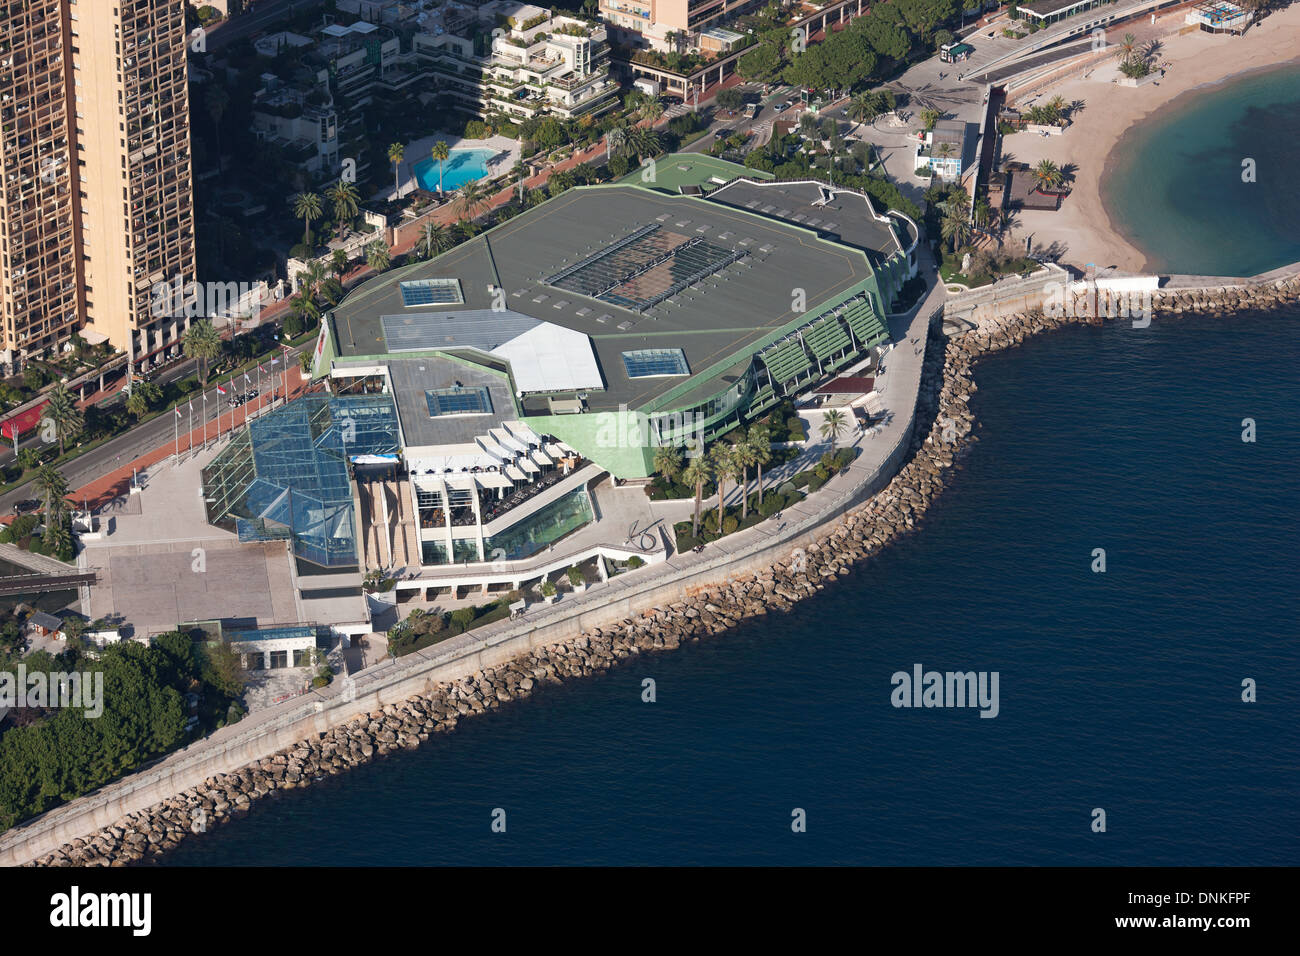 AERIAL VIEW. Congress and cultural center built on reclaimed land. Grimaldi Forum, District of Larvotto, Principality of Monaco. Stock Photo